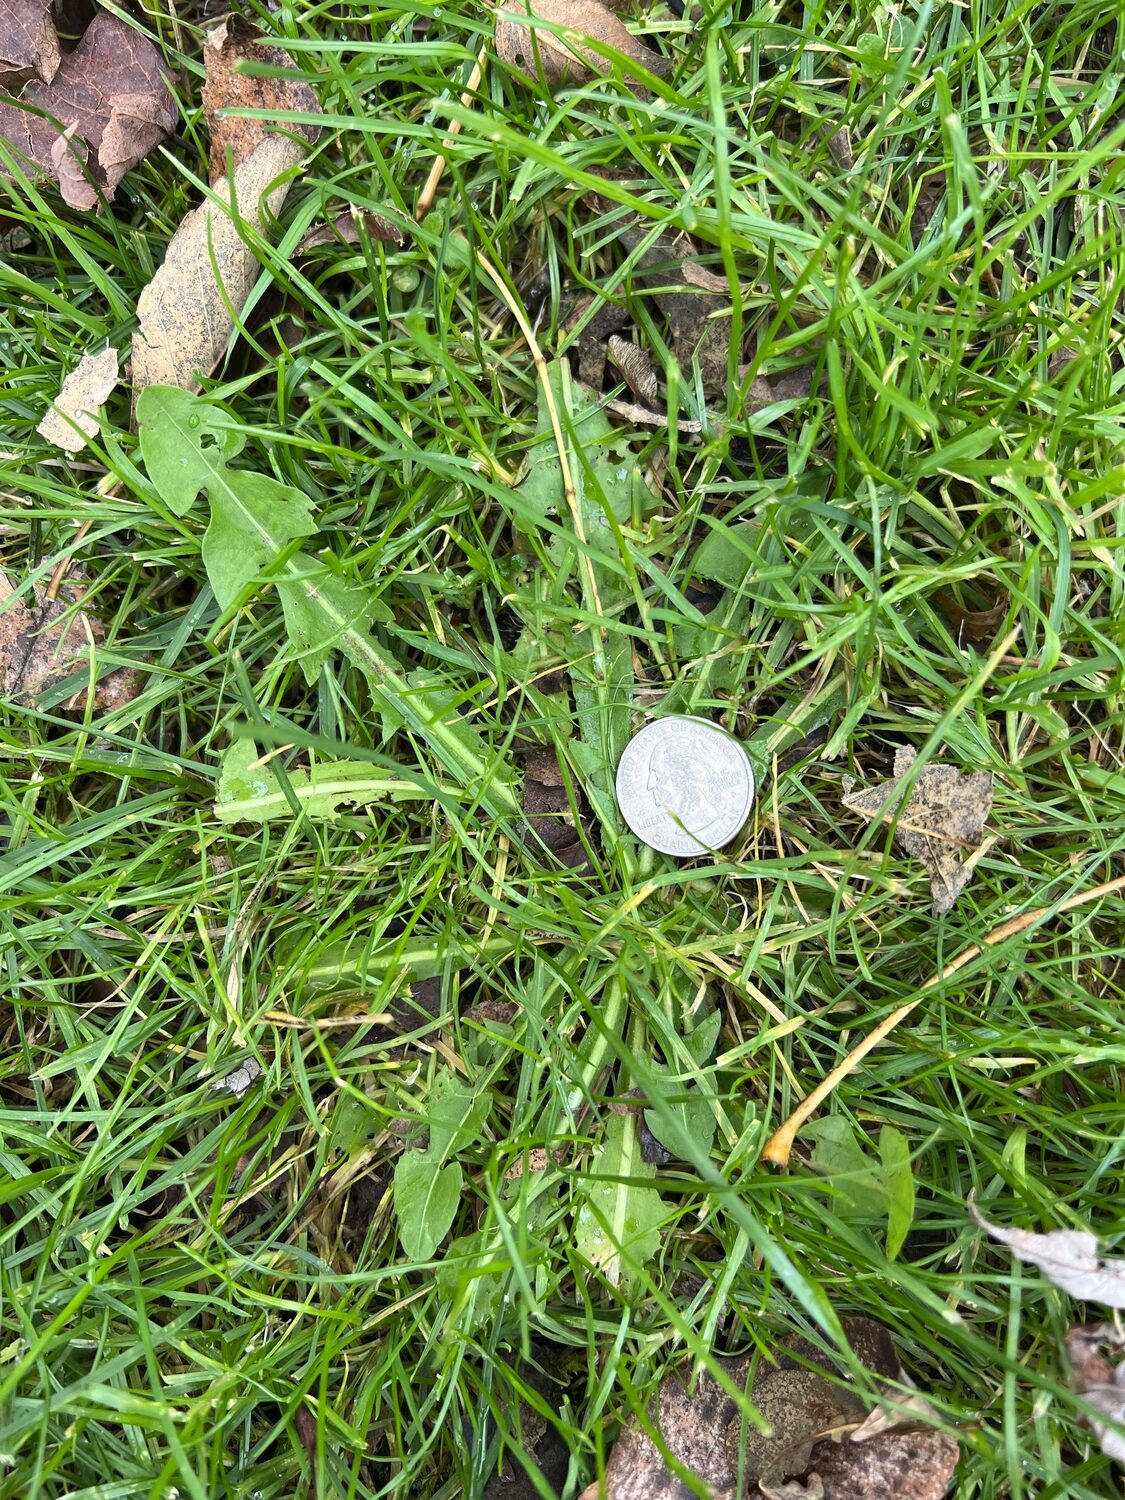 One of the most common lawn weeds is the dandelion. This is actually a seedling, which will bloom next spring providing hundreds of new possibilities to invade your lawn. A broad-leaf perennial weed, dandelions are easily addressed in the fall so they don’t become an issue next year.  ANDREW MESSINGER